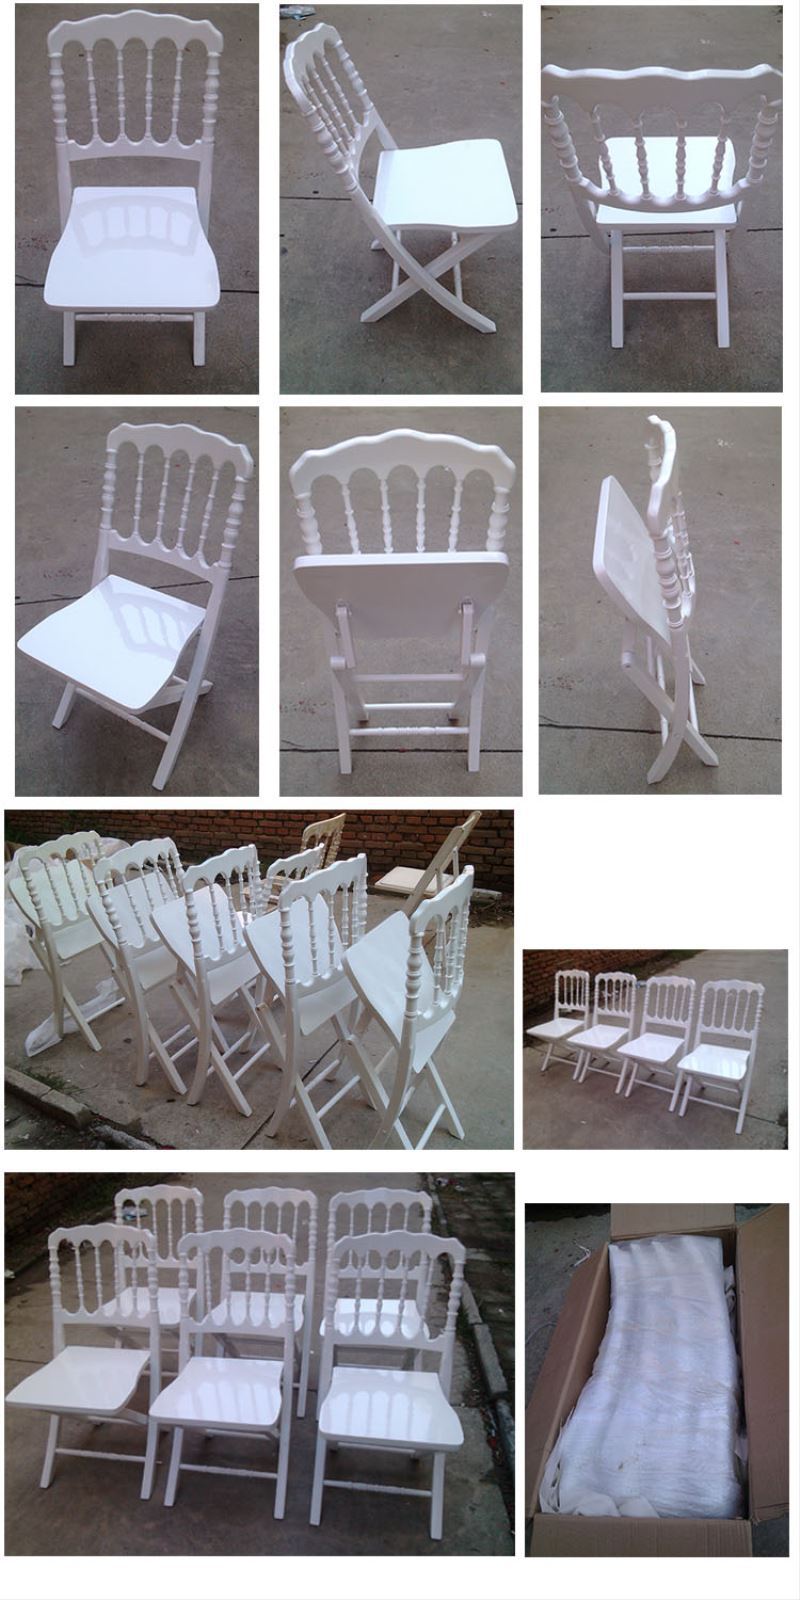 hot sale rental party folding chairs for Party and Wedding